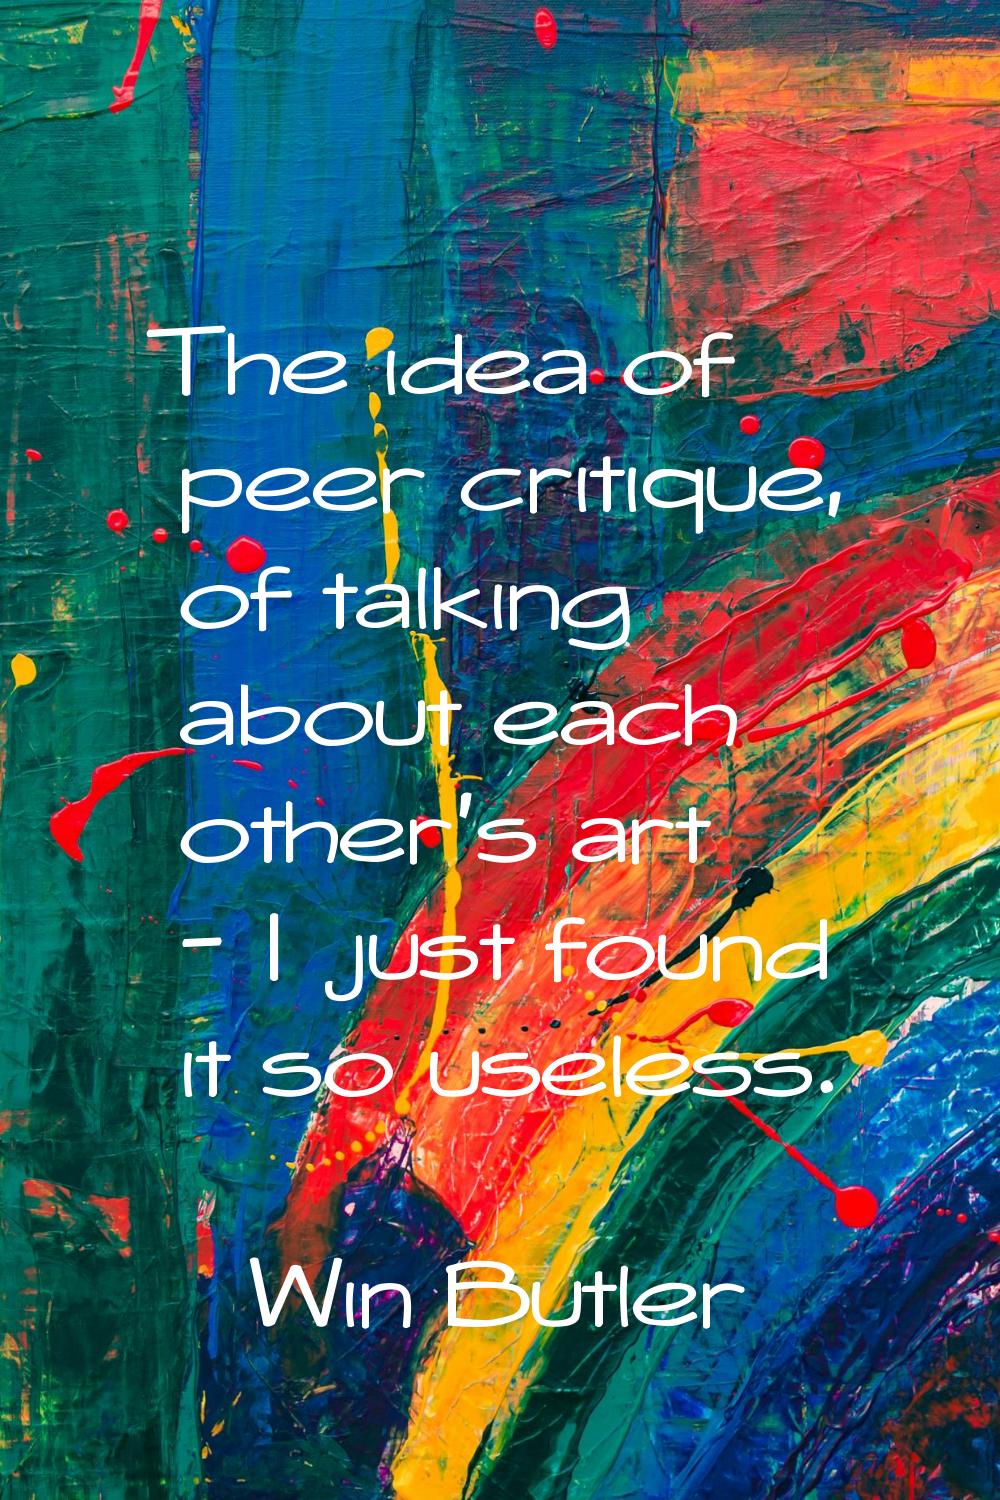 The idea of peer critique, of talking about each other's art - I just found it so useless.